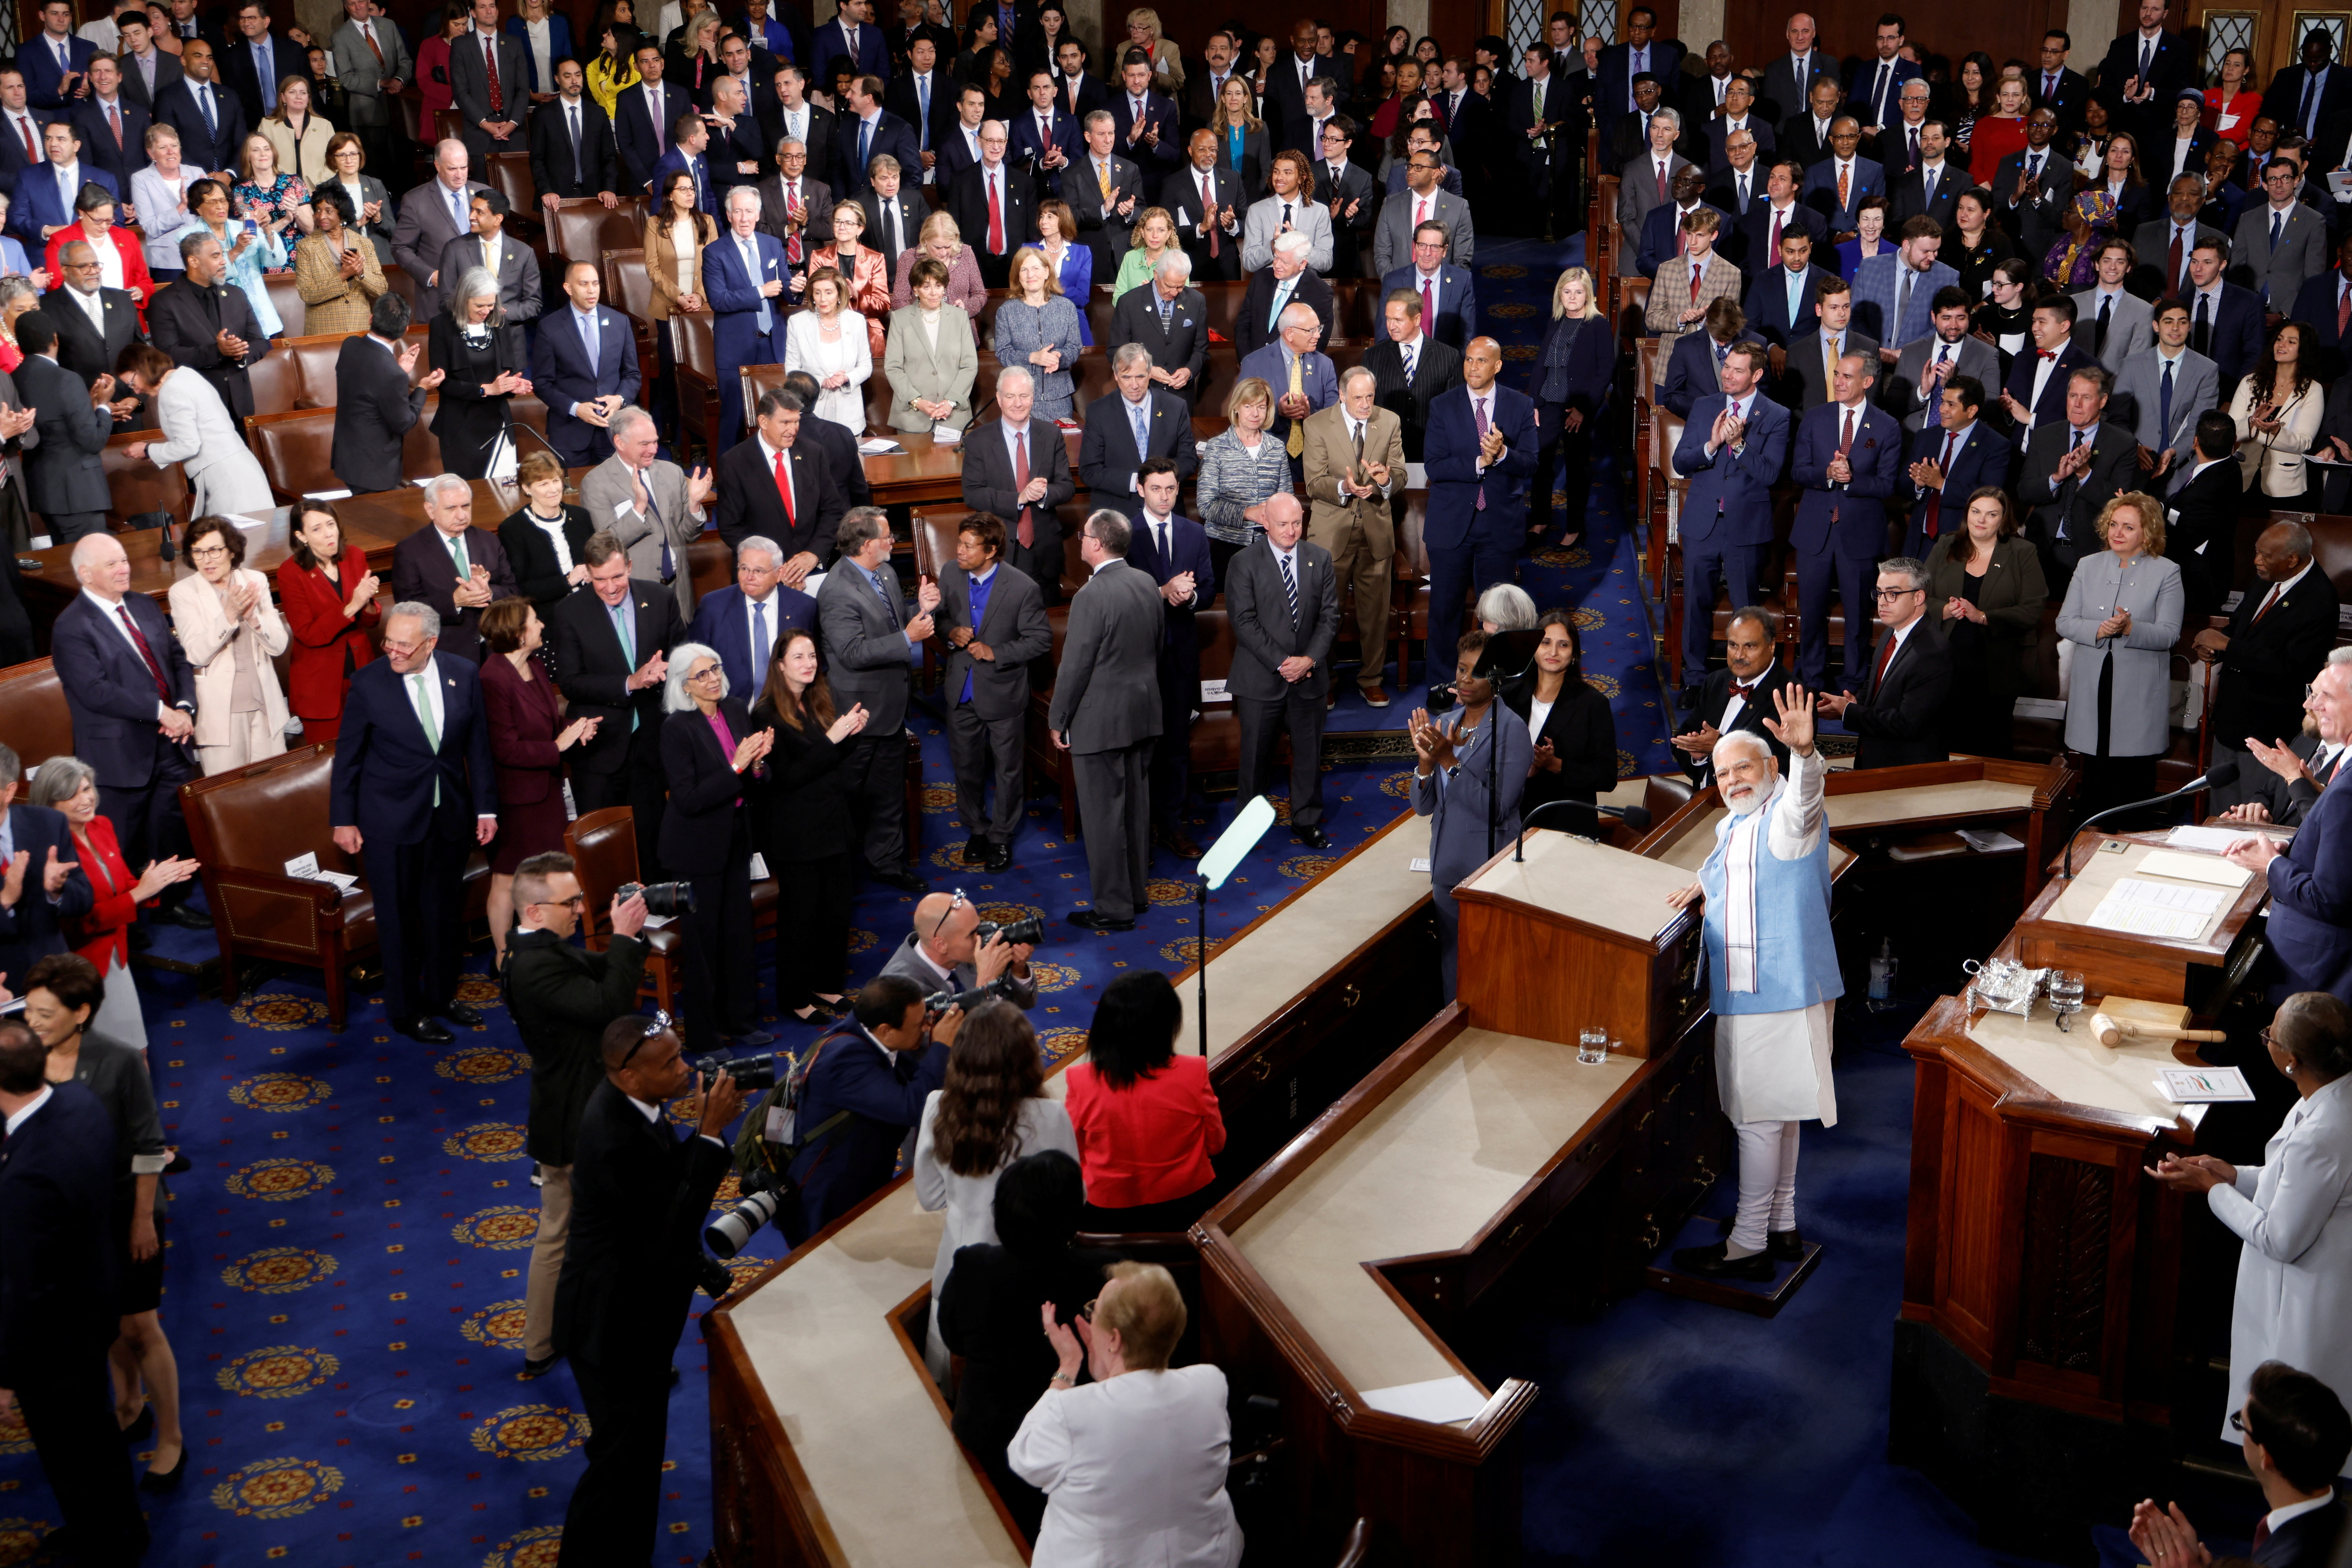 India’s Prime Minister Narendra Modi addresses a joint meeting of Congress in Washington